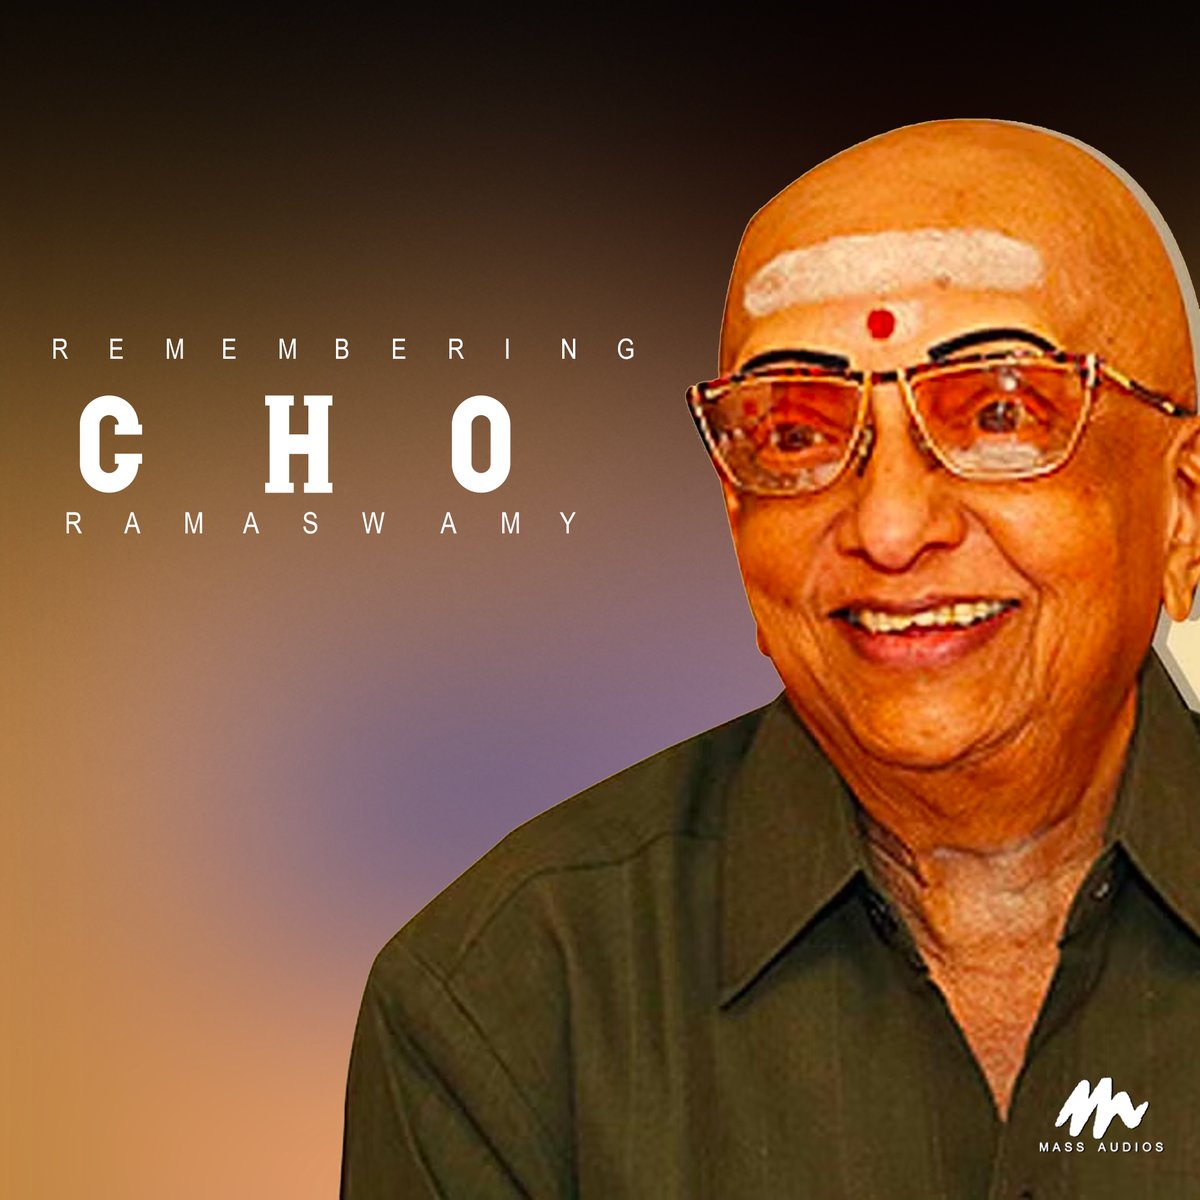 Remembering #cho On His Birthday Anniversary 
#happybirthdaycho #birthdayanniversary #massaudioa